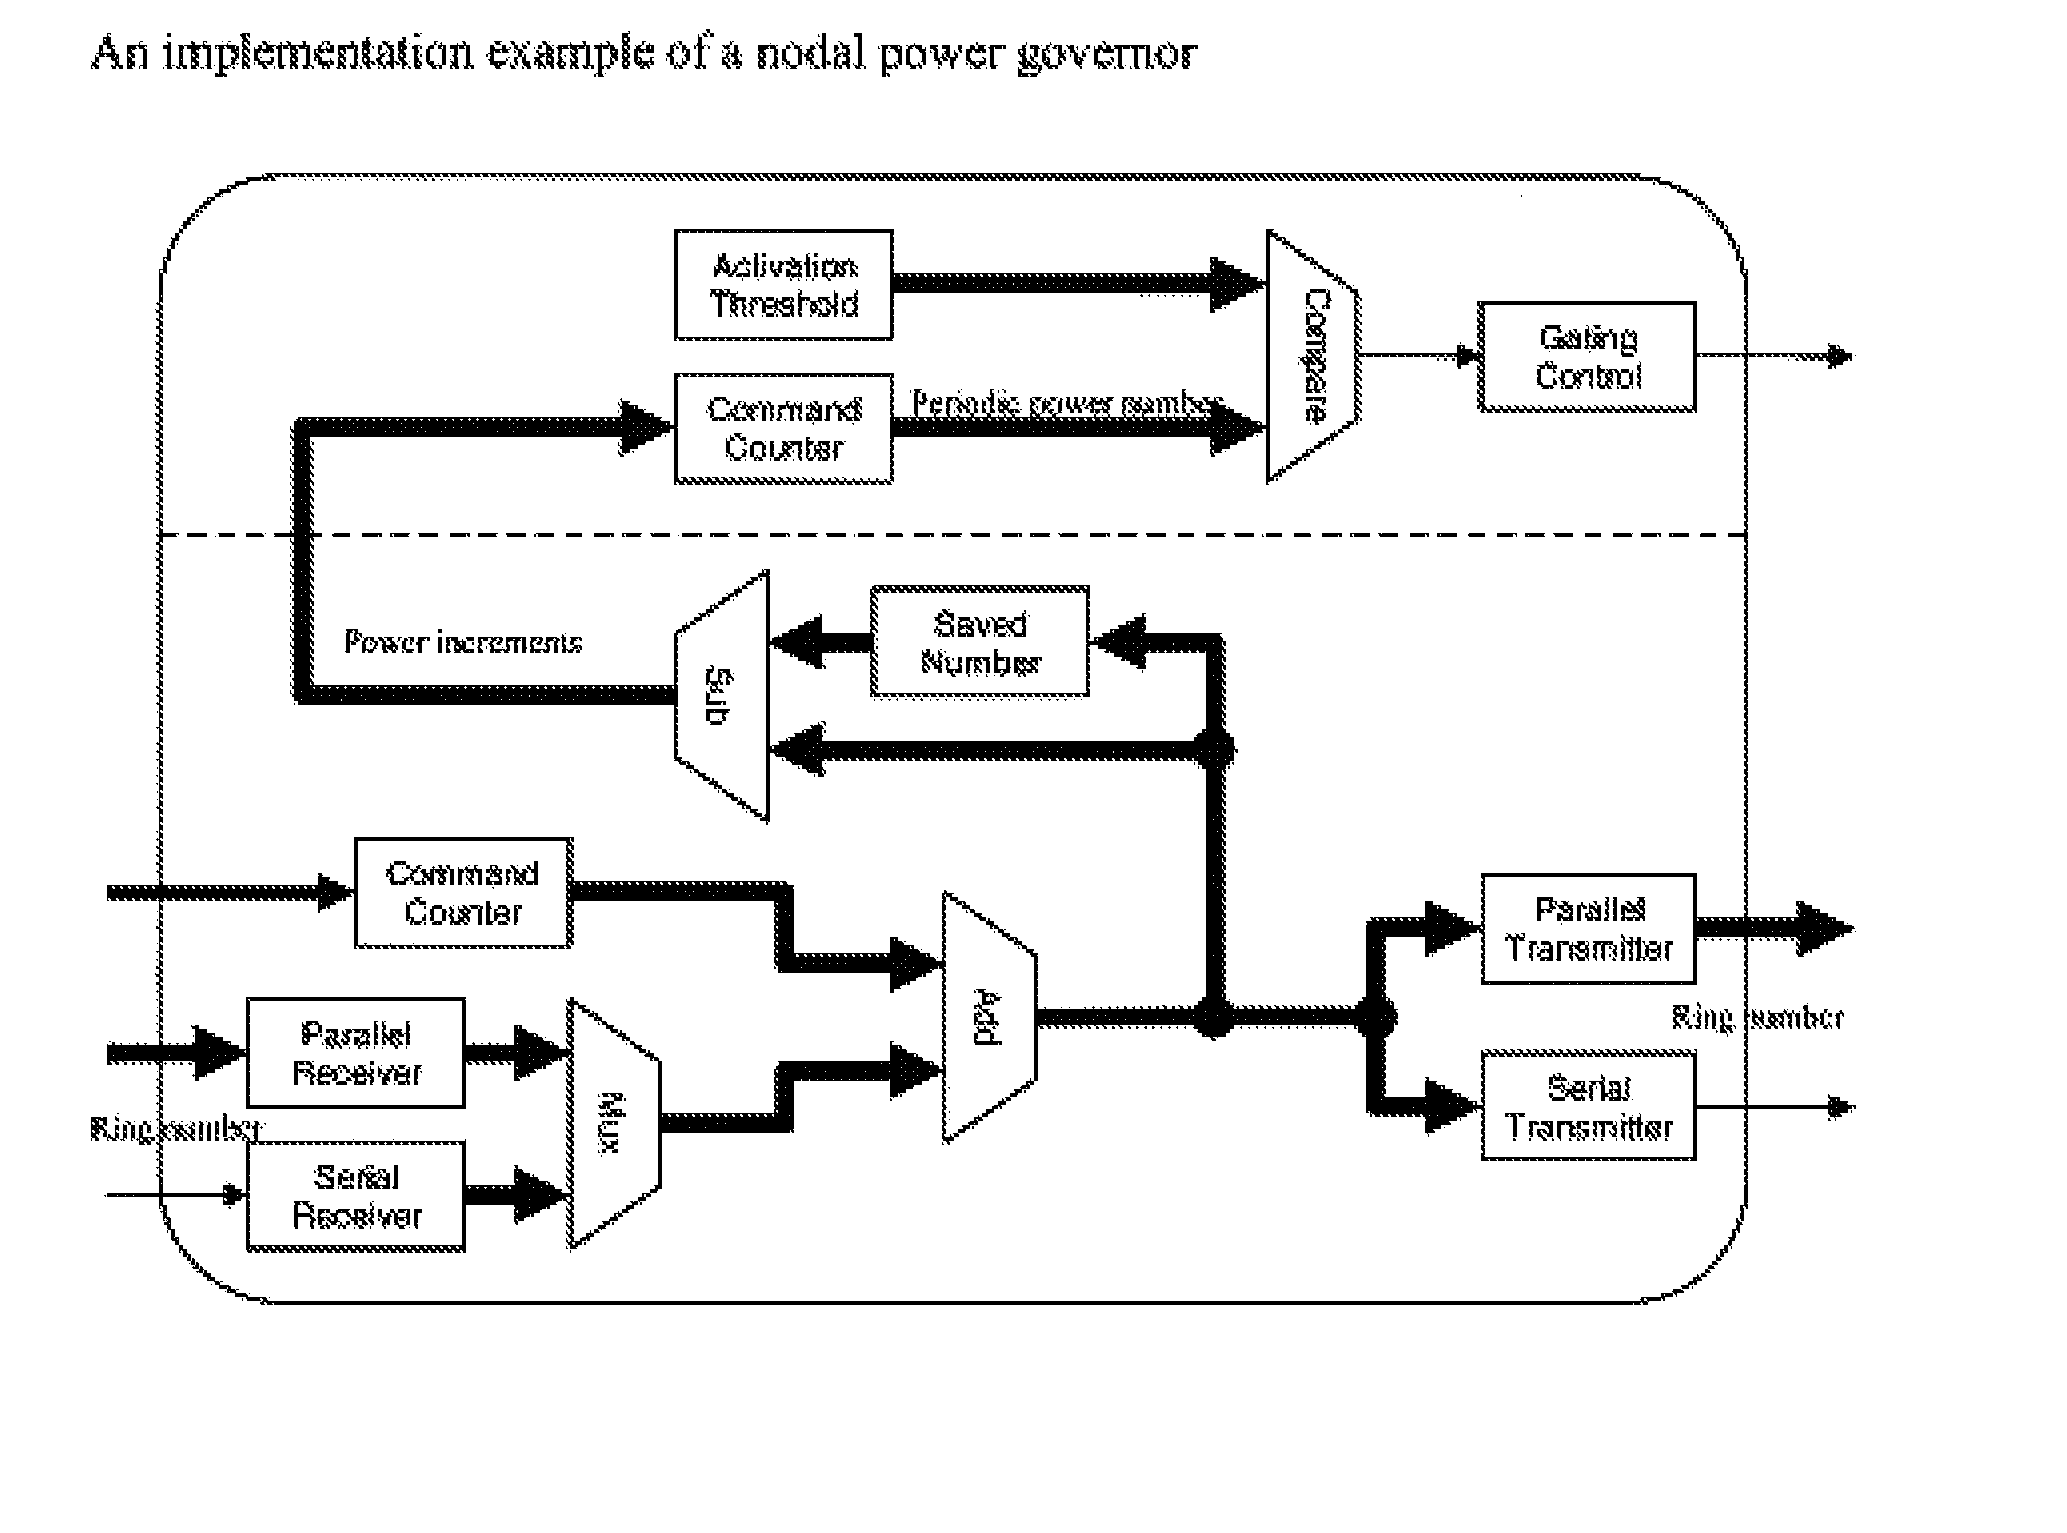 Method for Regulating System Power Using a Power Governor for DRAM in a Multi-Node Computer System